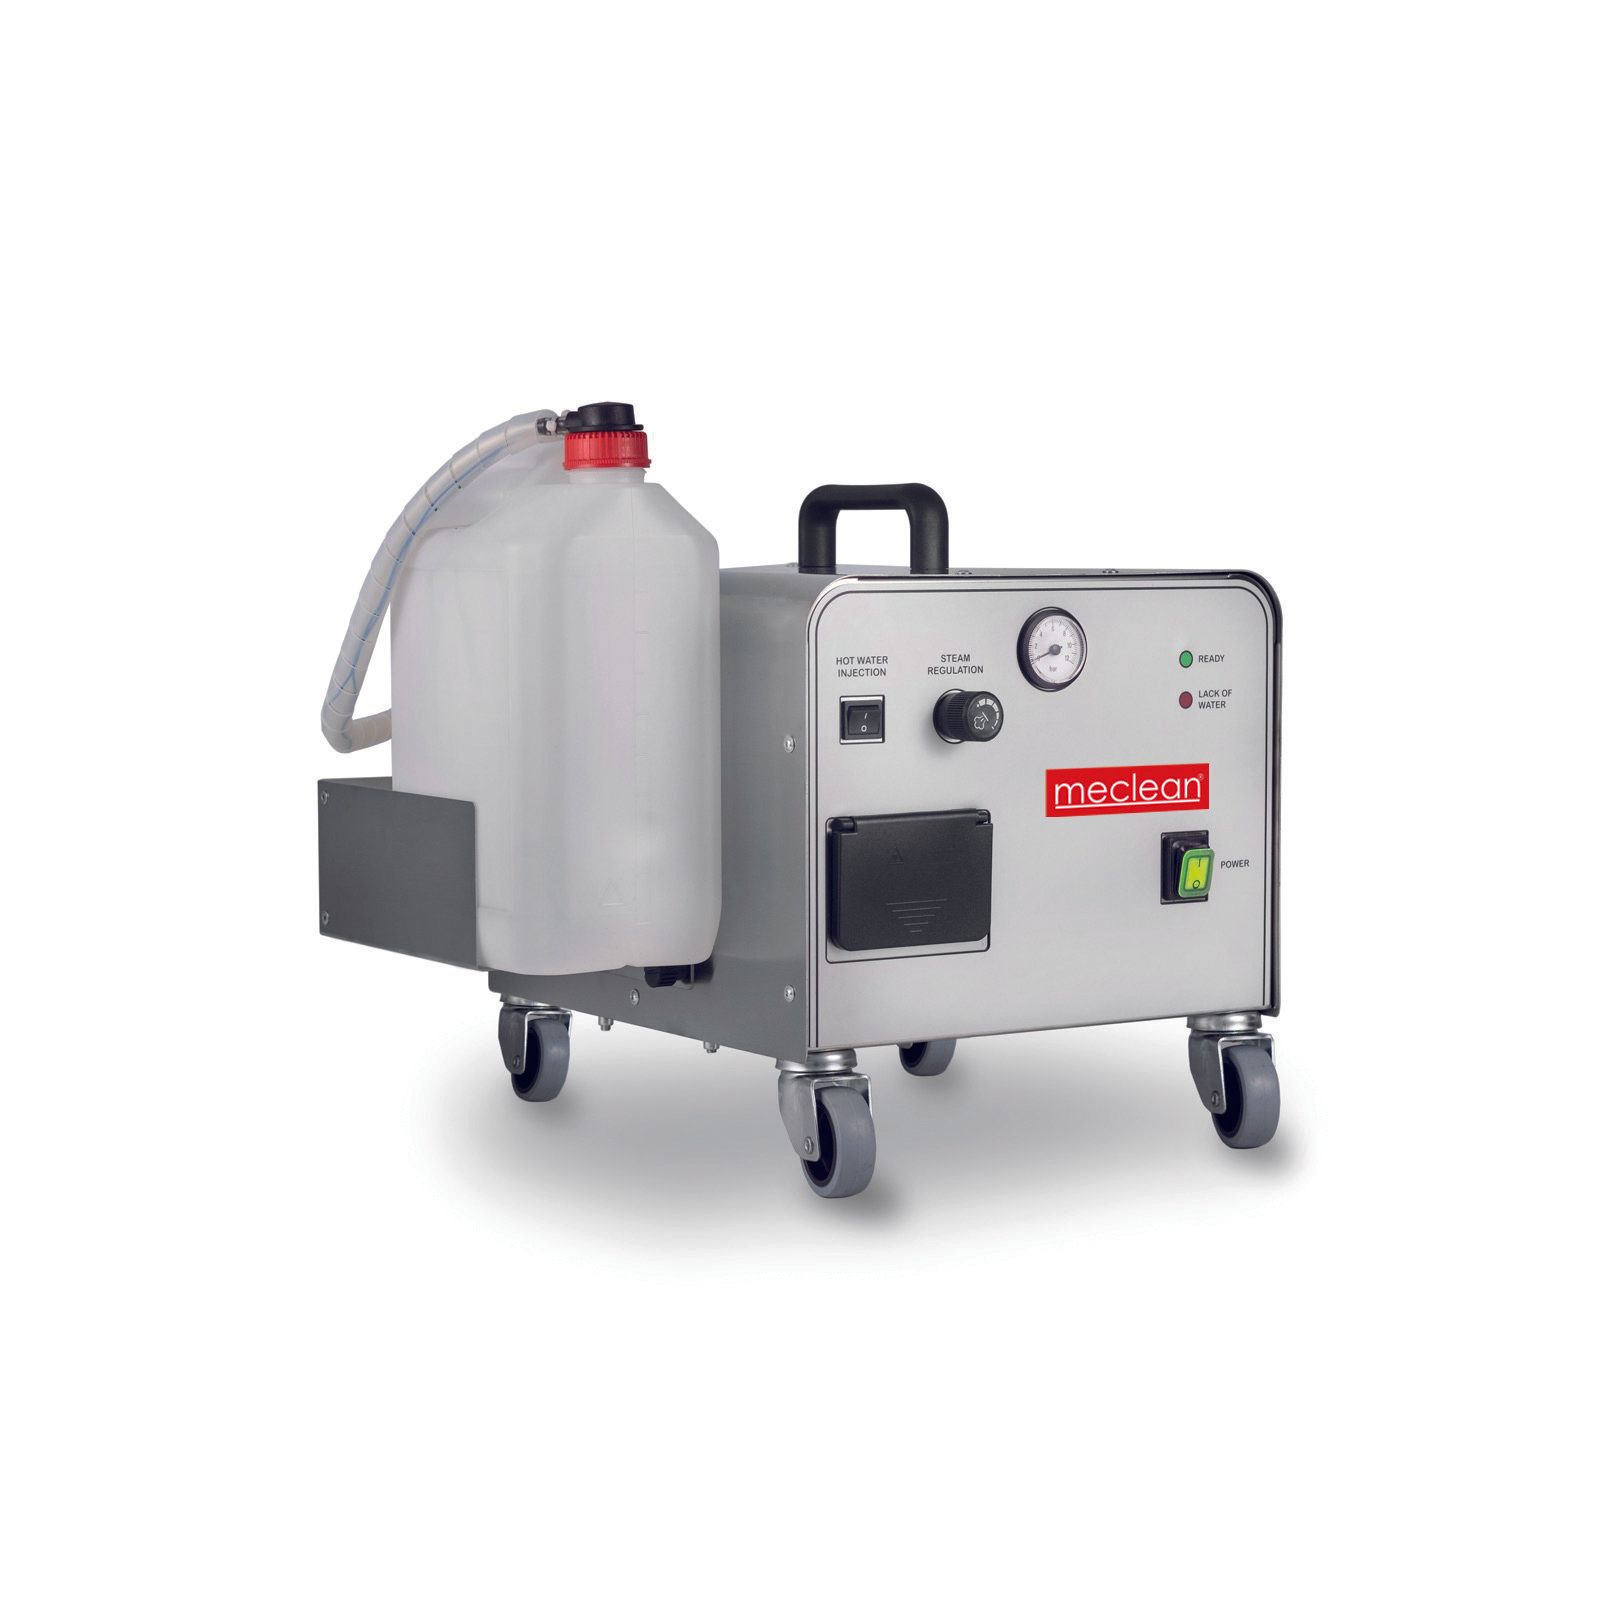 Meclean industrial steam cleaning machine Steampower One